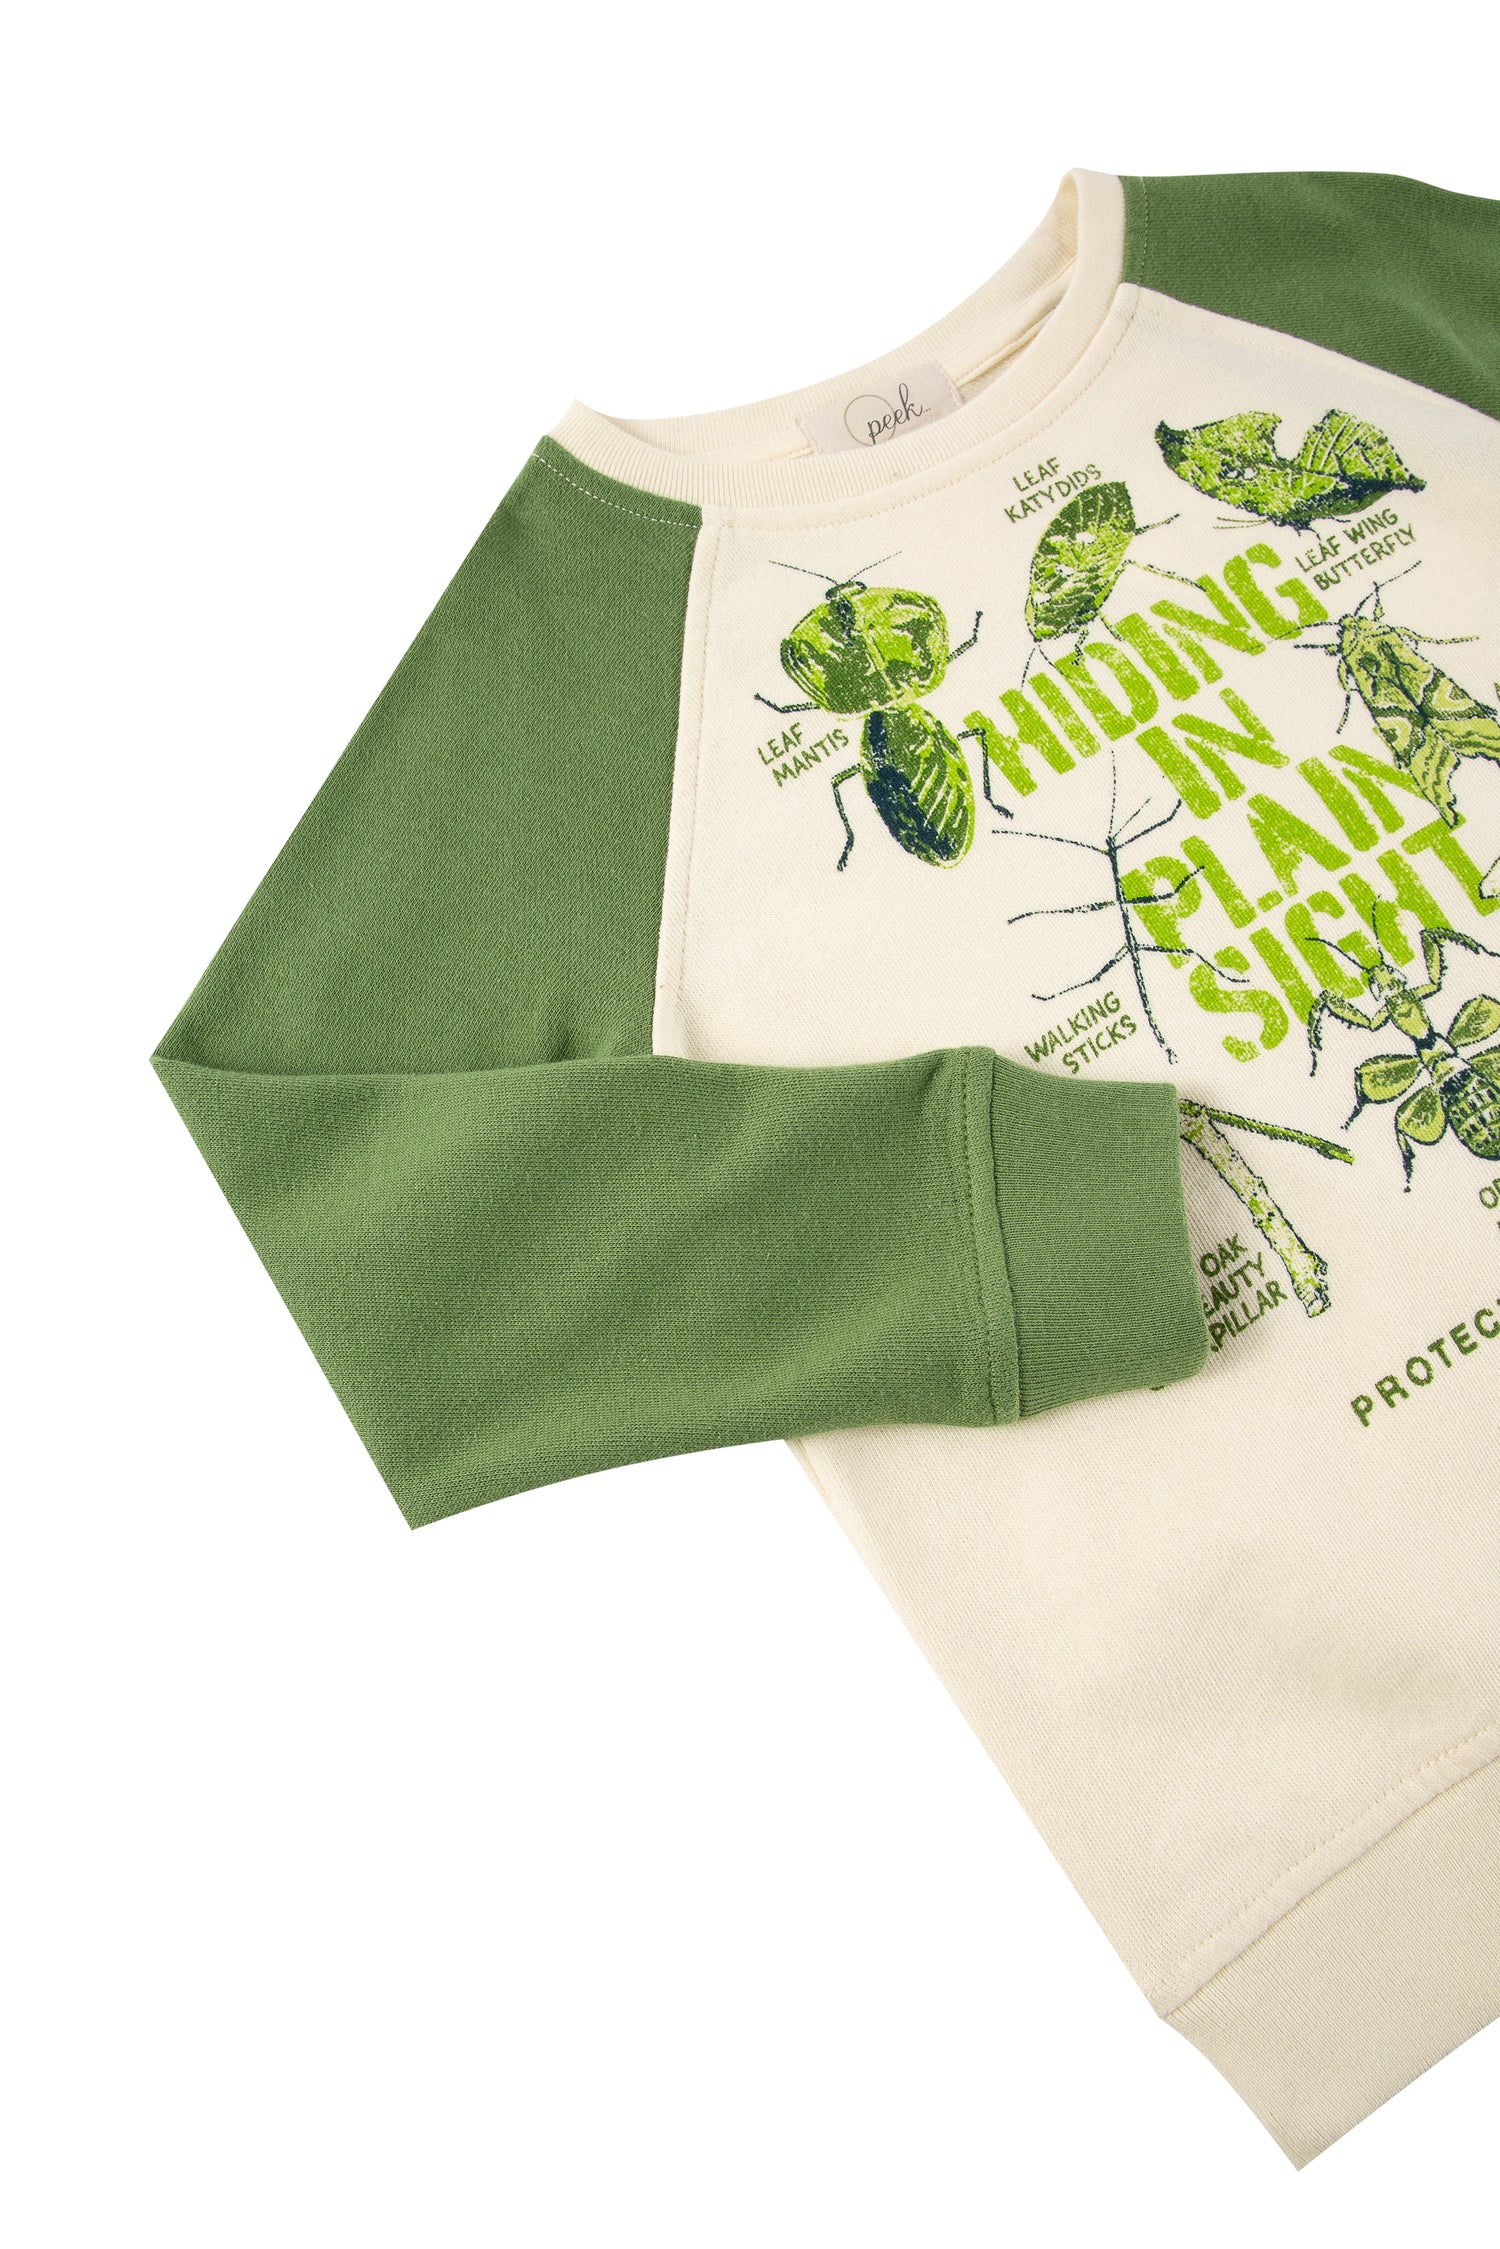 Close up of green and white sweatshirt with illustrations of various green-colored bugs 'hiding in plain sight'